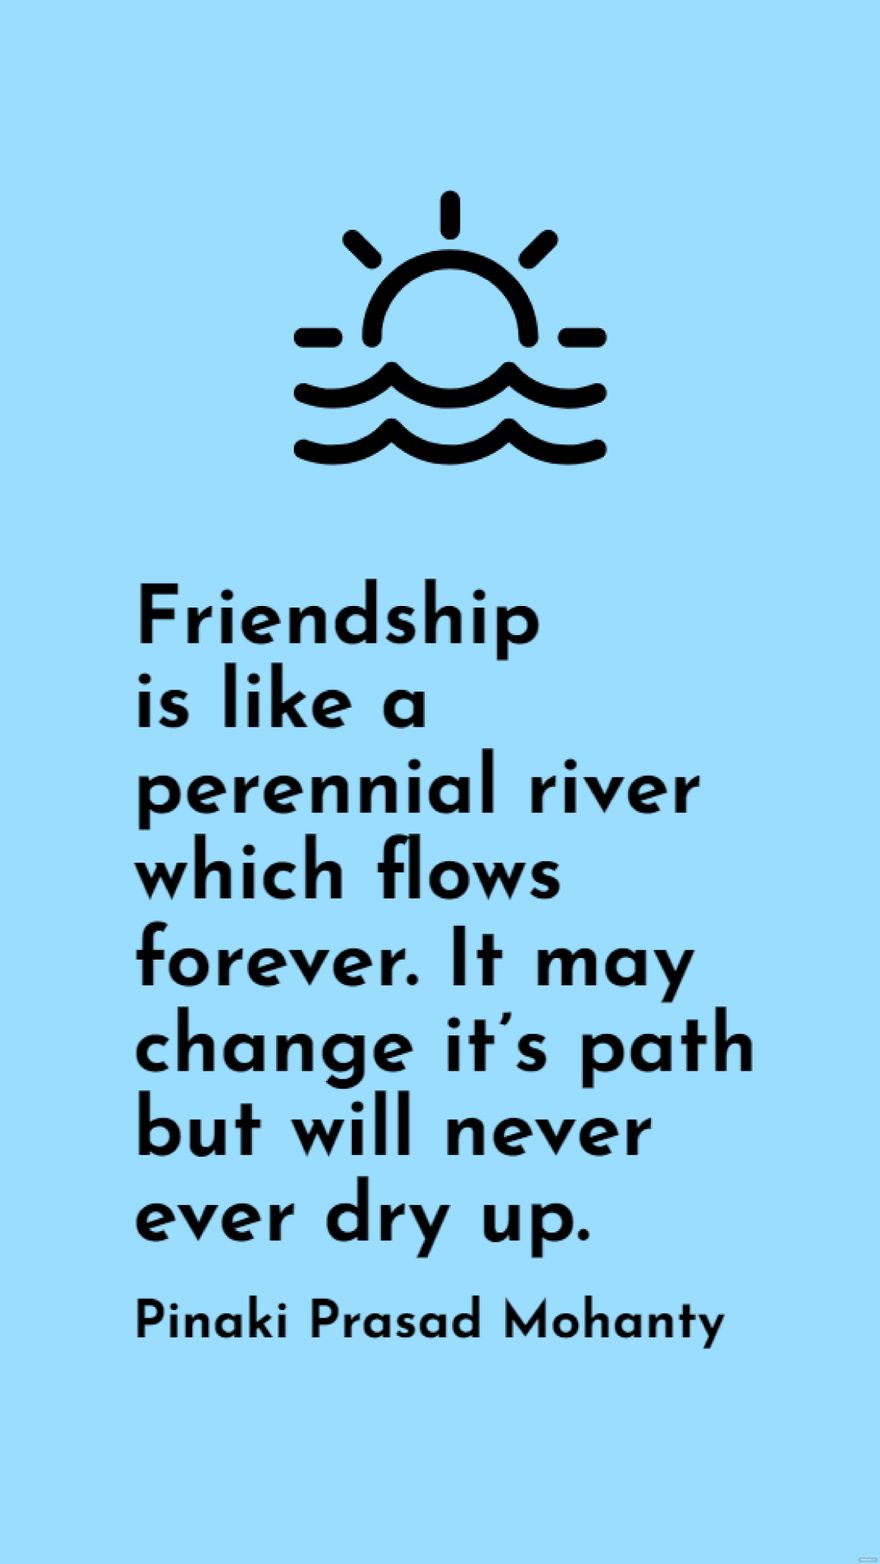 Free Pinaki Prasad Mohanty - Friendship is like a perennial river which flows forever. It may change it’s path but will never ever dry up. in JPG